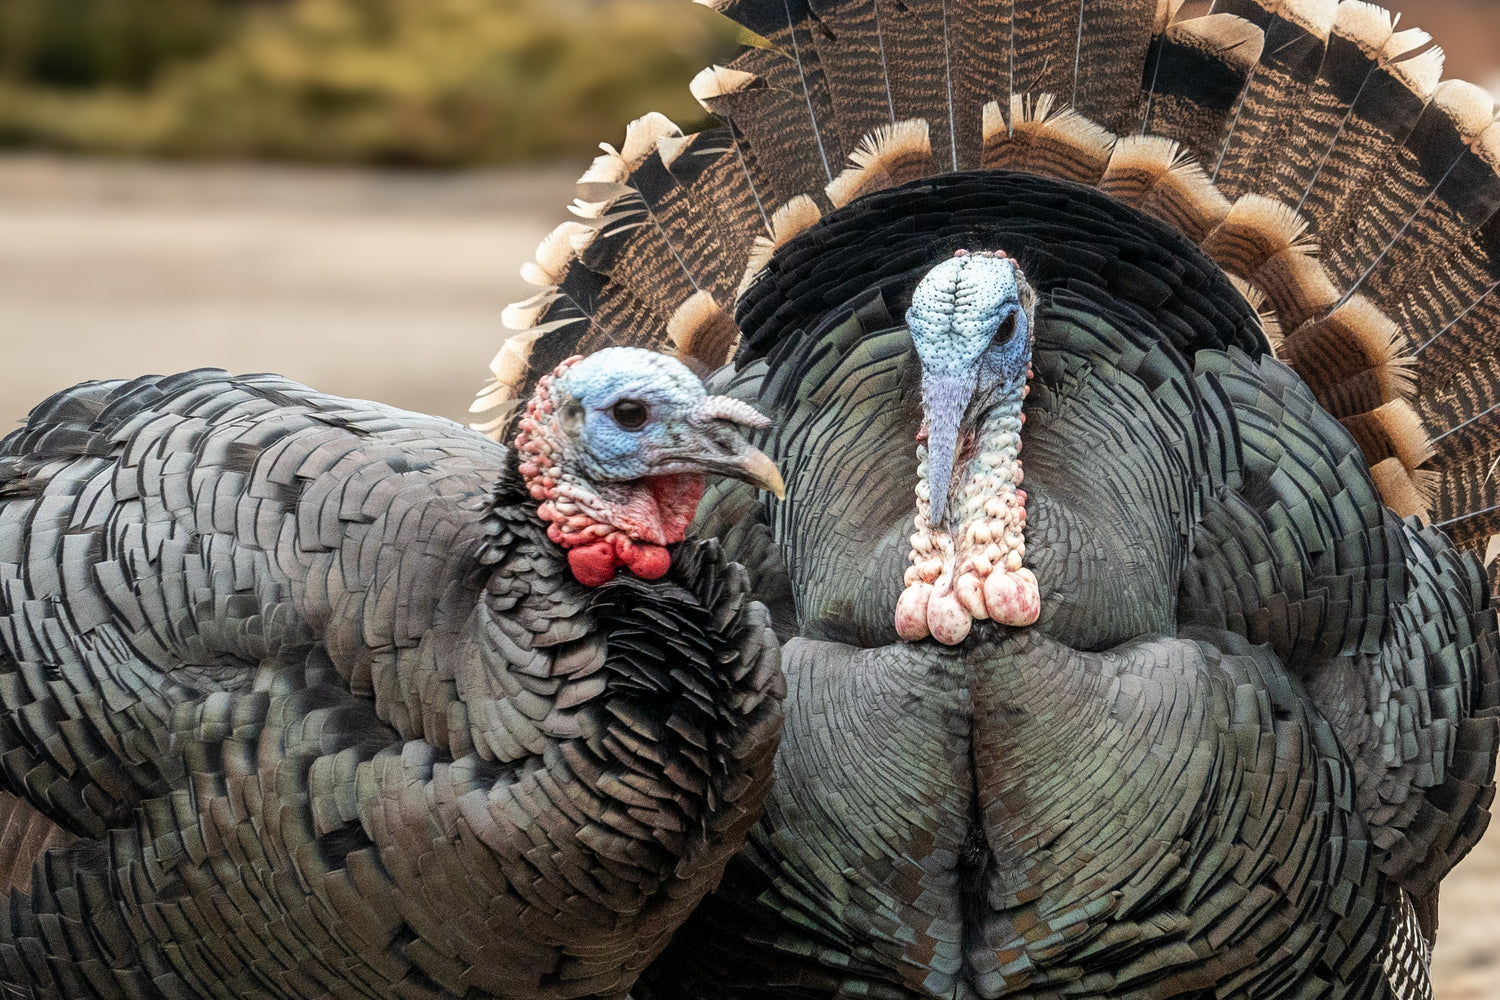 Persistence Pays: Tips for Late-Season Turkey Hunting